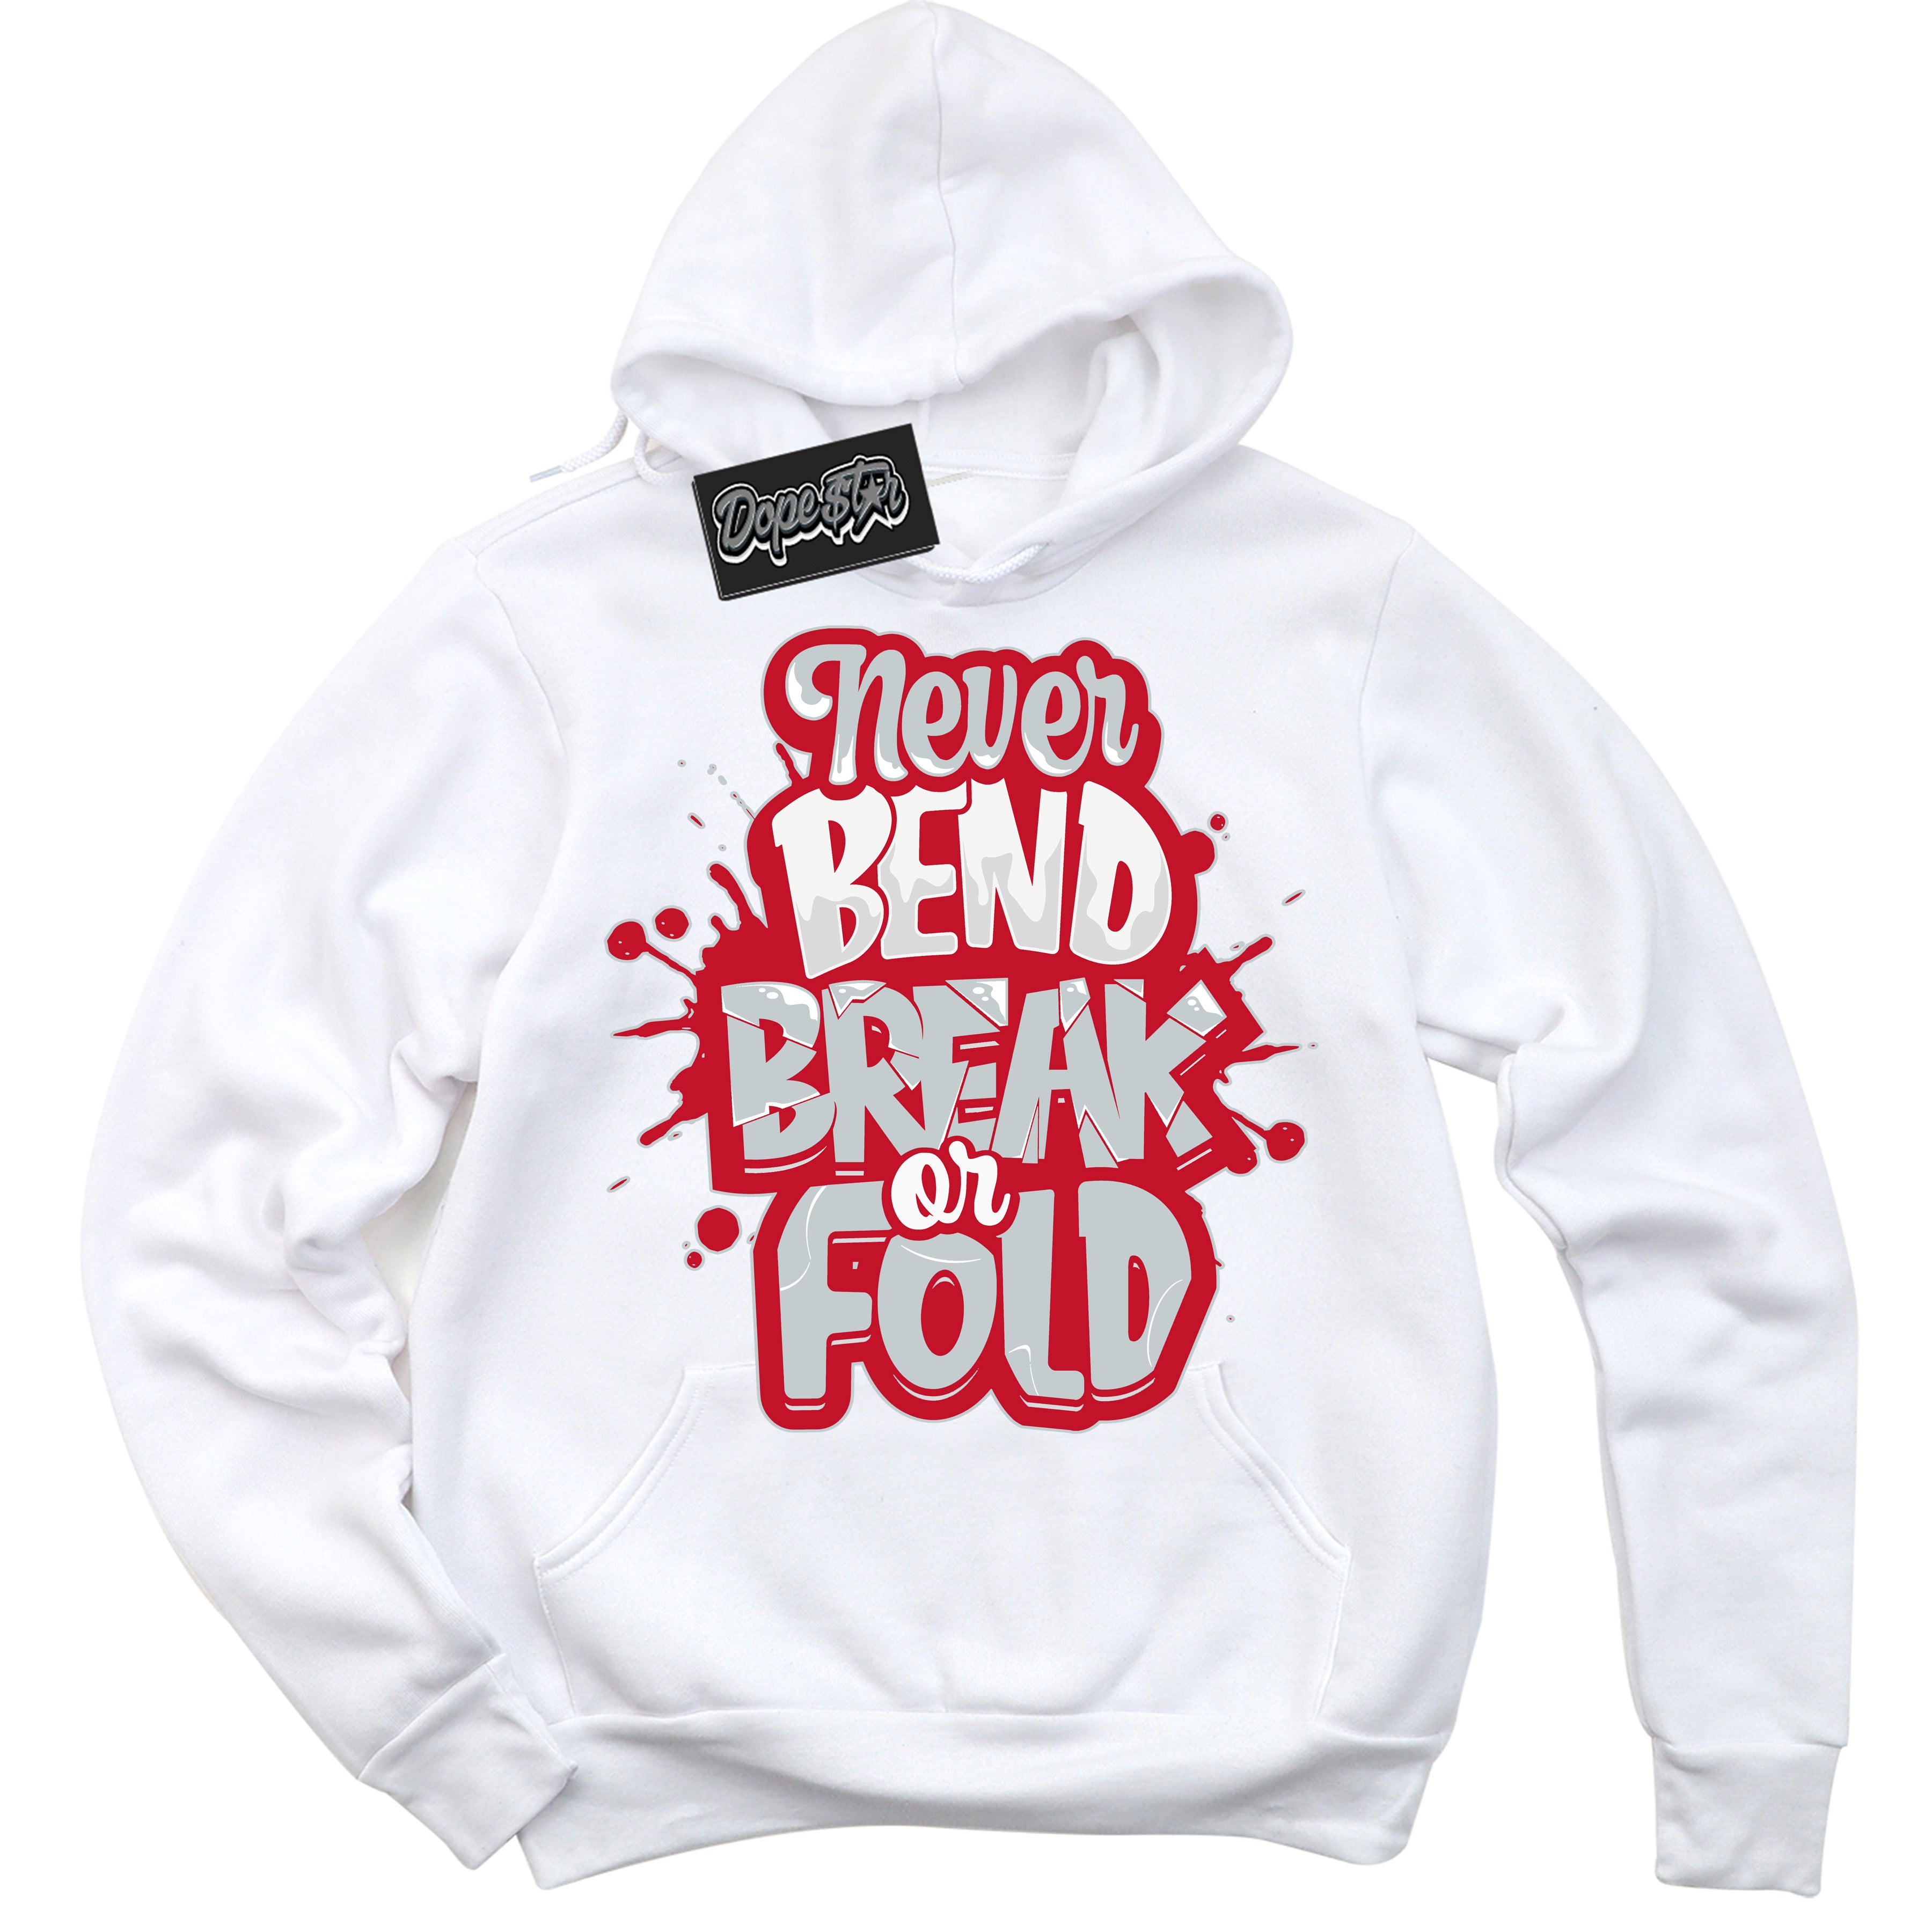 Cool Black Hoodie with “ Never Bend Break Or Fold ”  design that Perfectly Matches  Reverse Ultraman Sneakers.